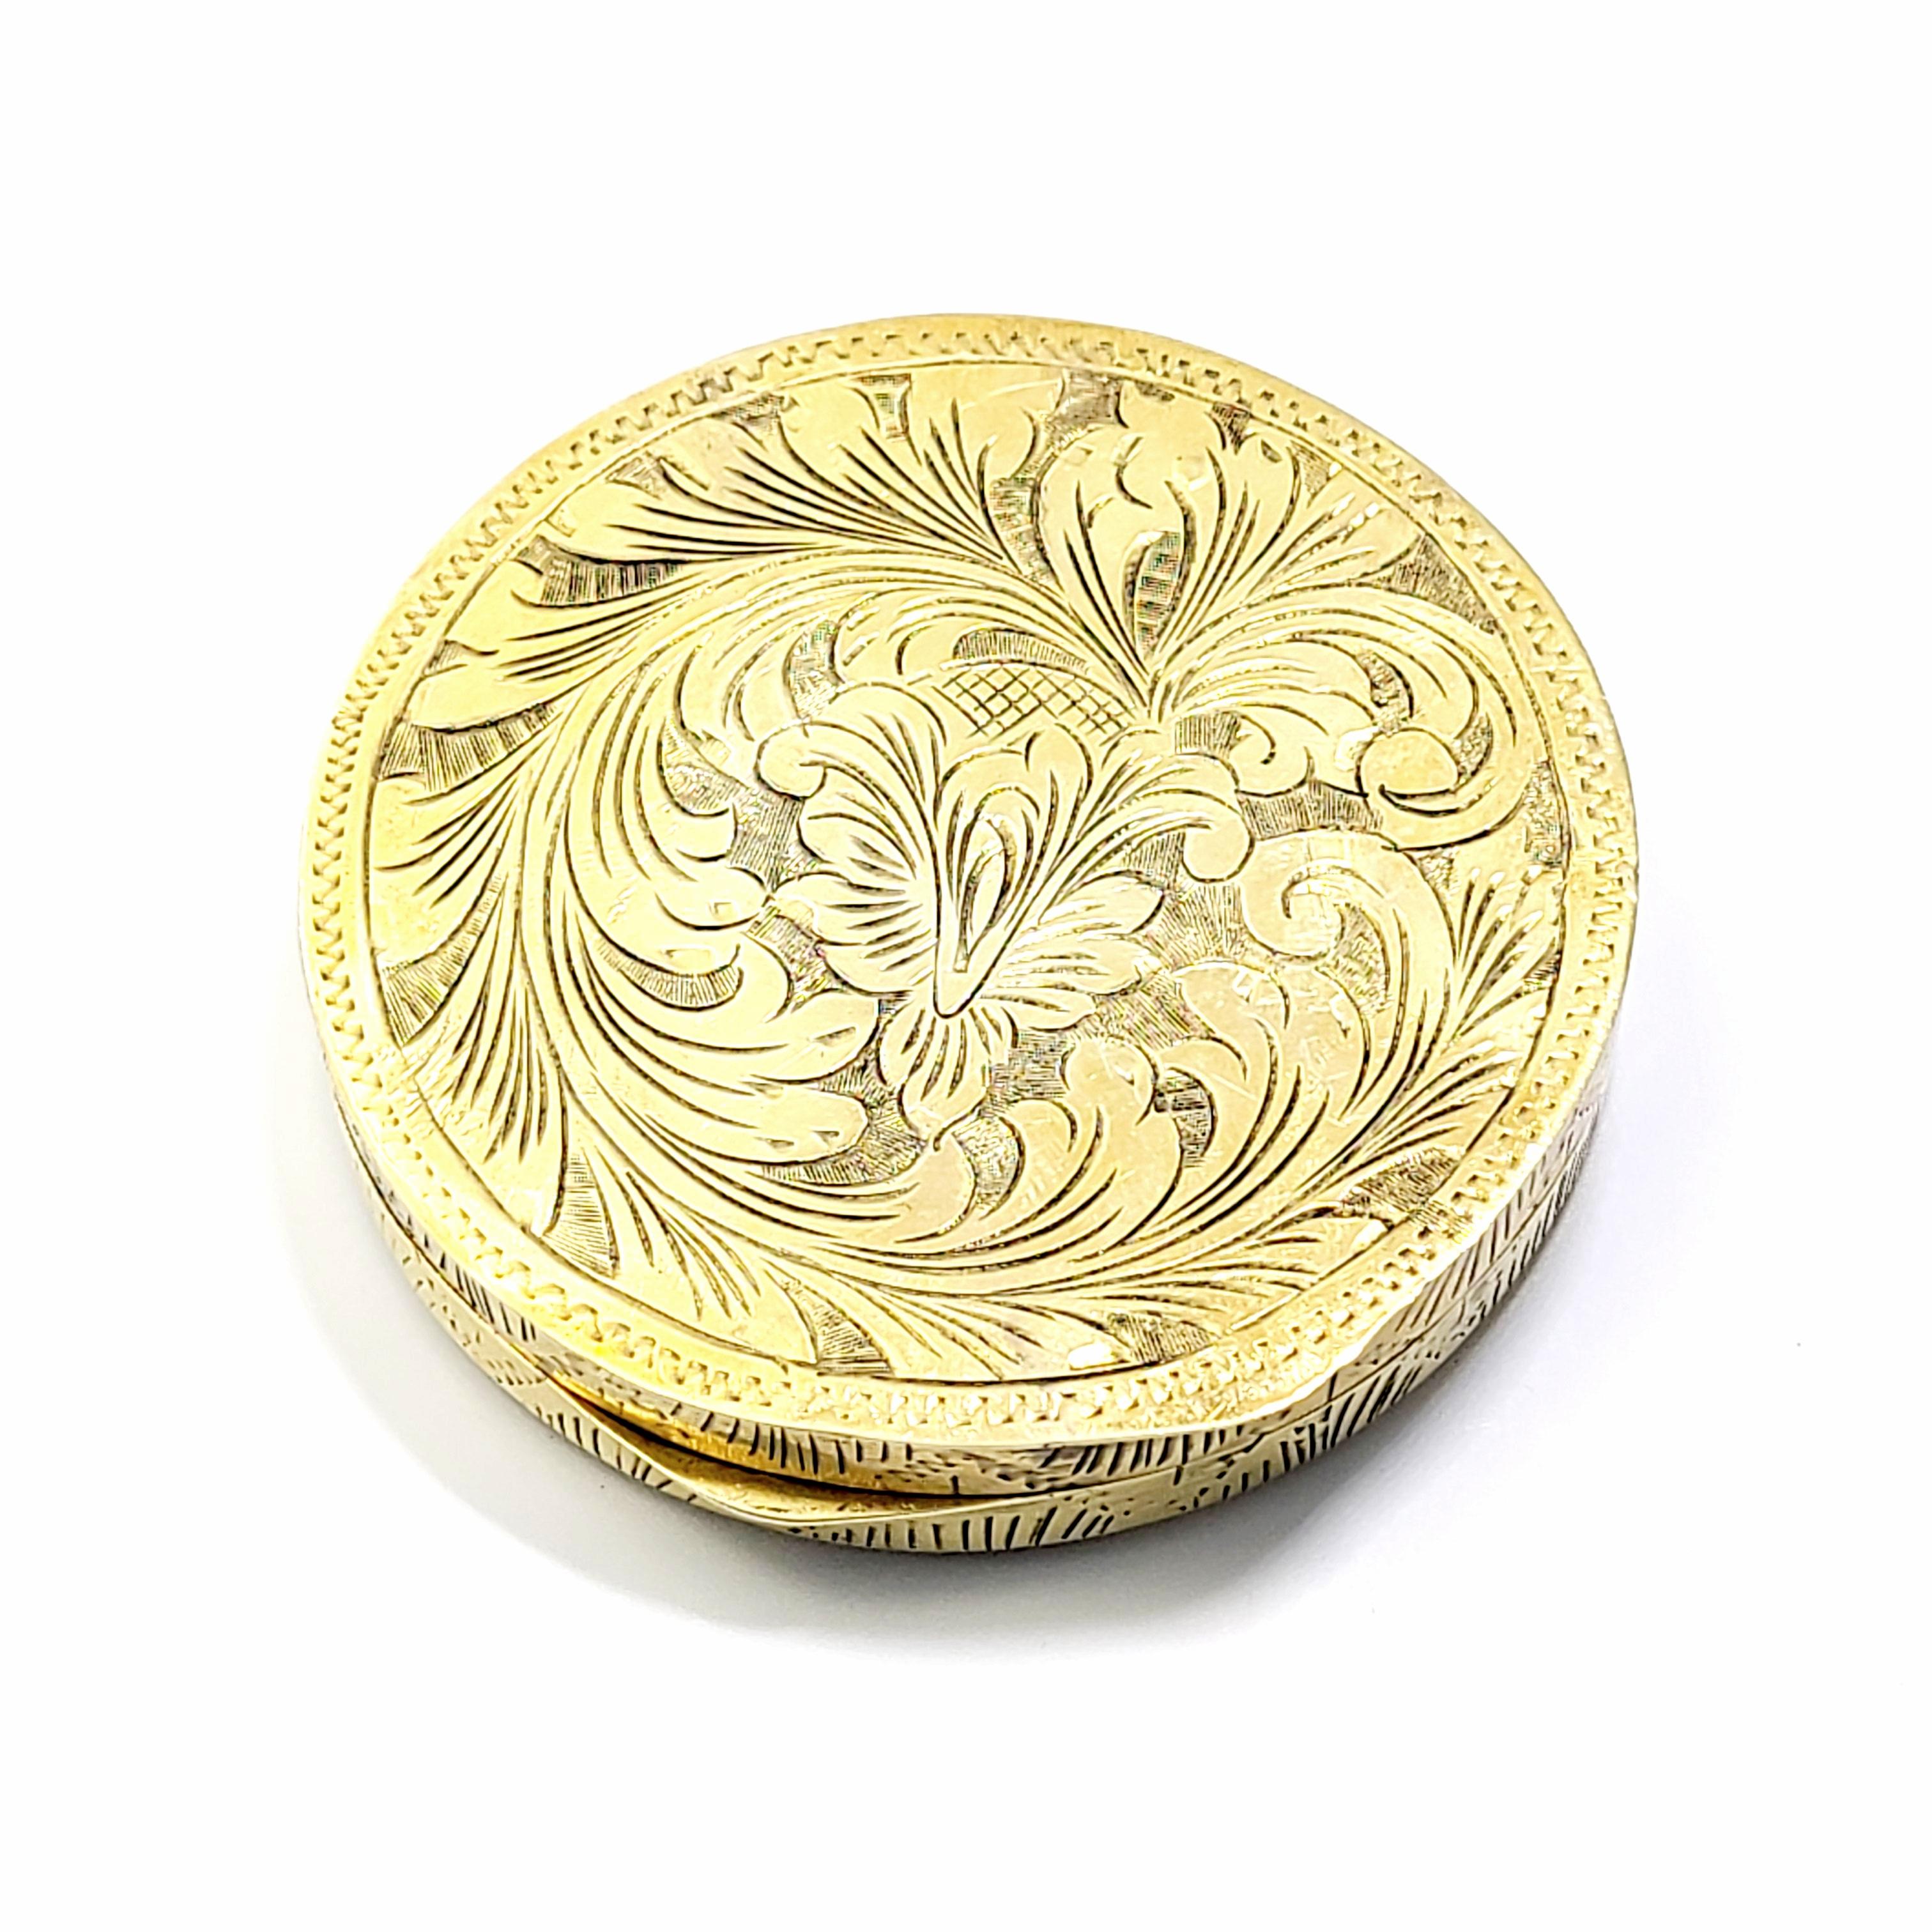 Antique Italian 800 silver with gold vermeil and hand painted enamel compact.

This round compact features beautiful gold vermeil over 800 silver with an etched scroll design. Hand painted Italian lovers scene on one side, with painted faux lapis